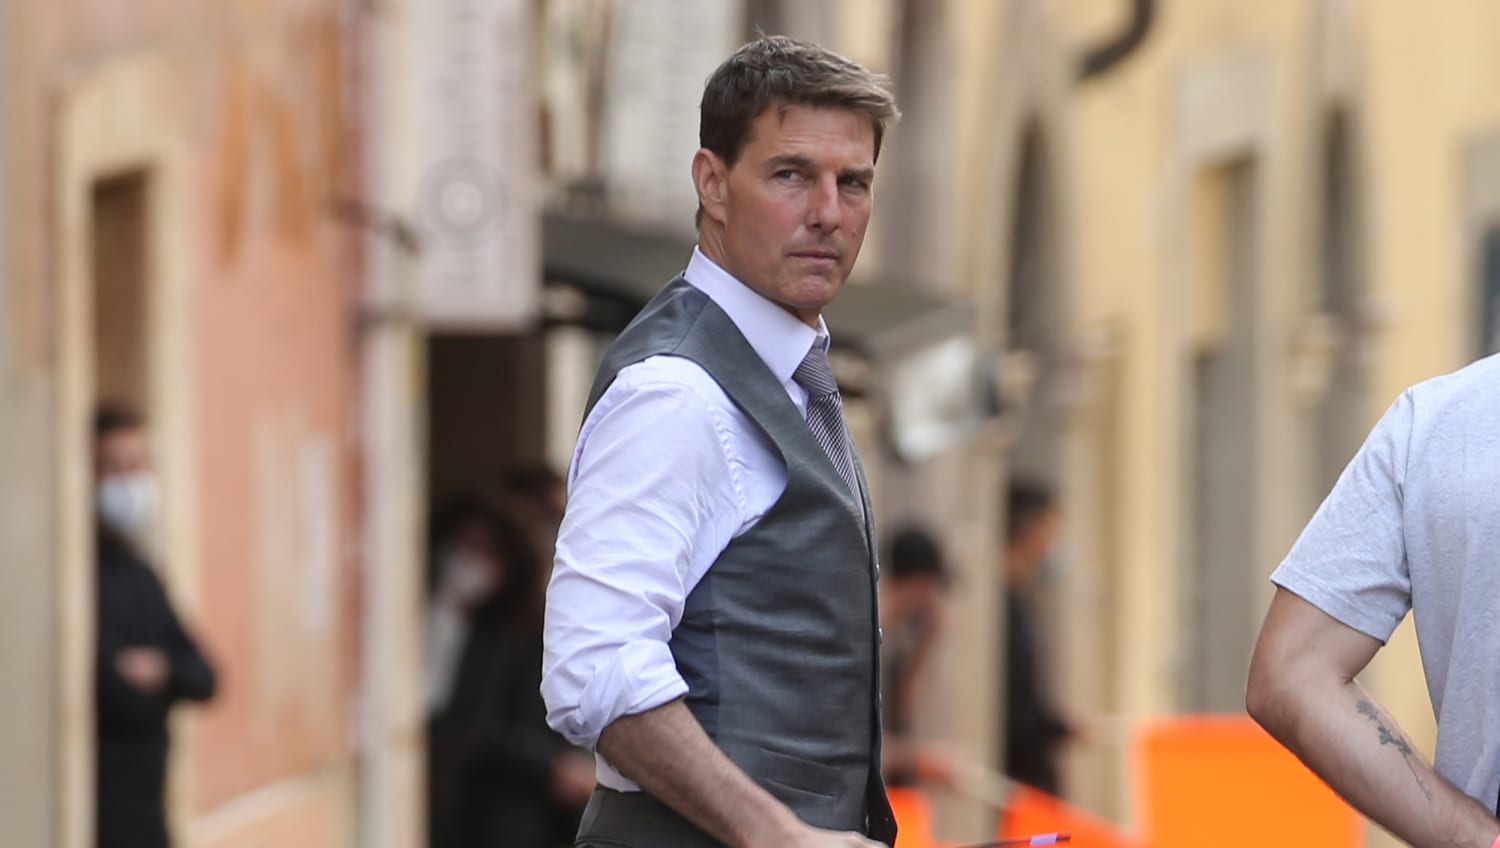 Inside Tom Cruise's On-Set Outburst: 'He's a Perfectionist,' Says Source